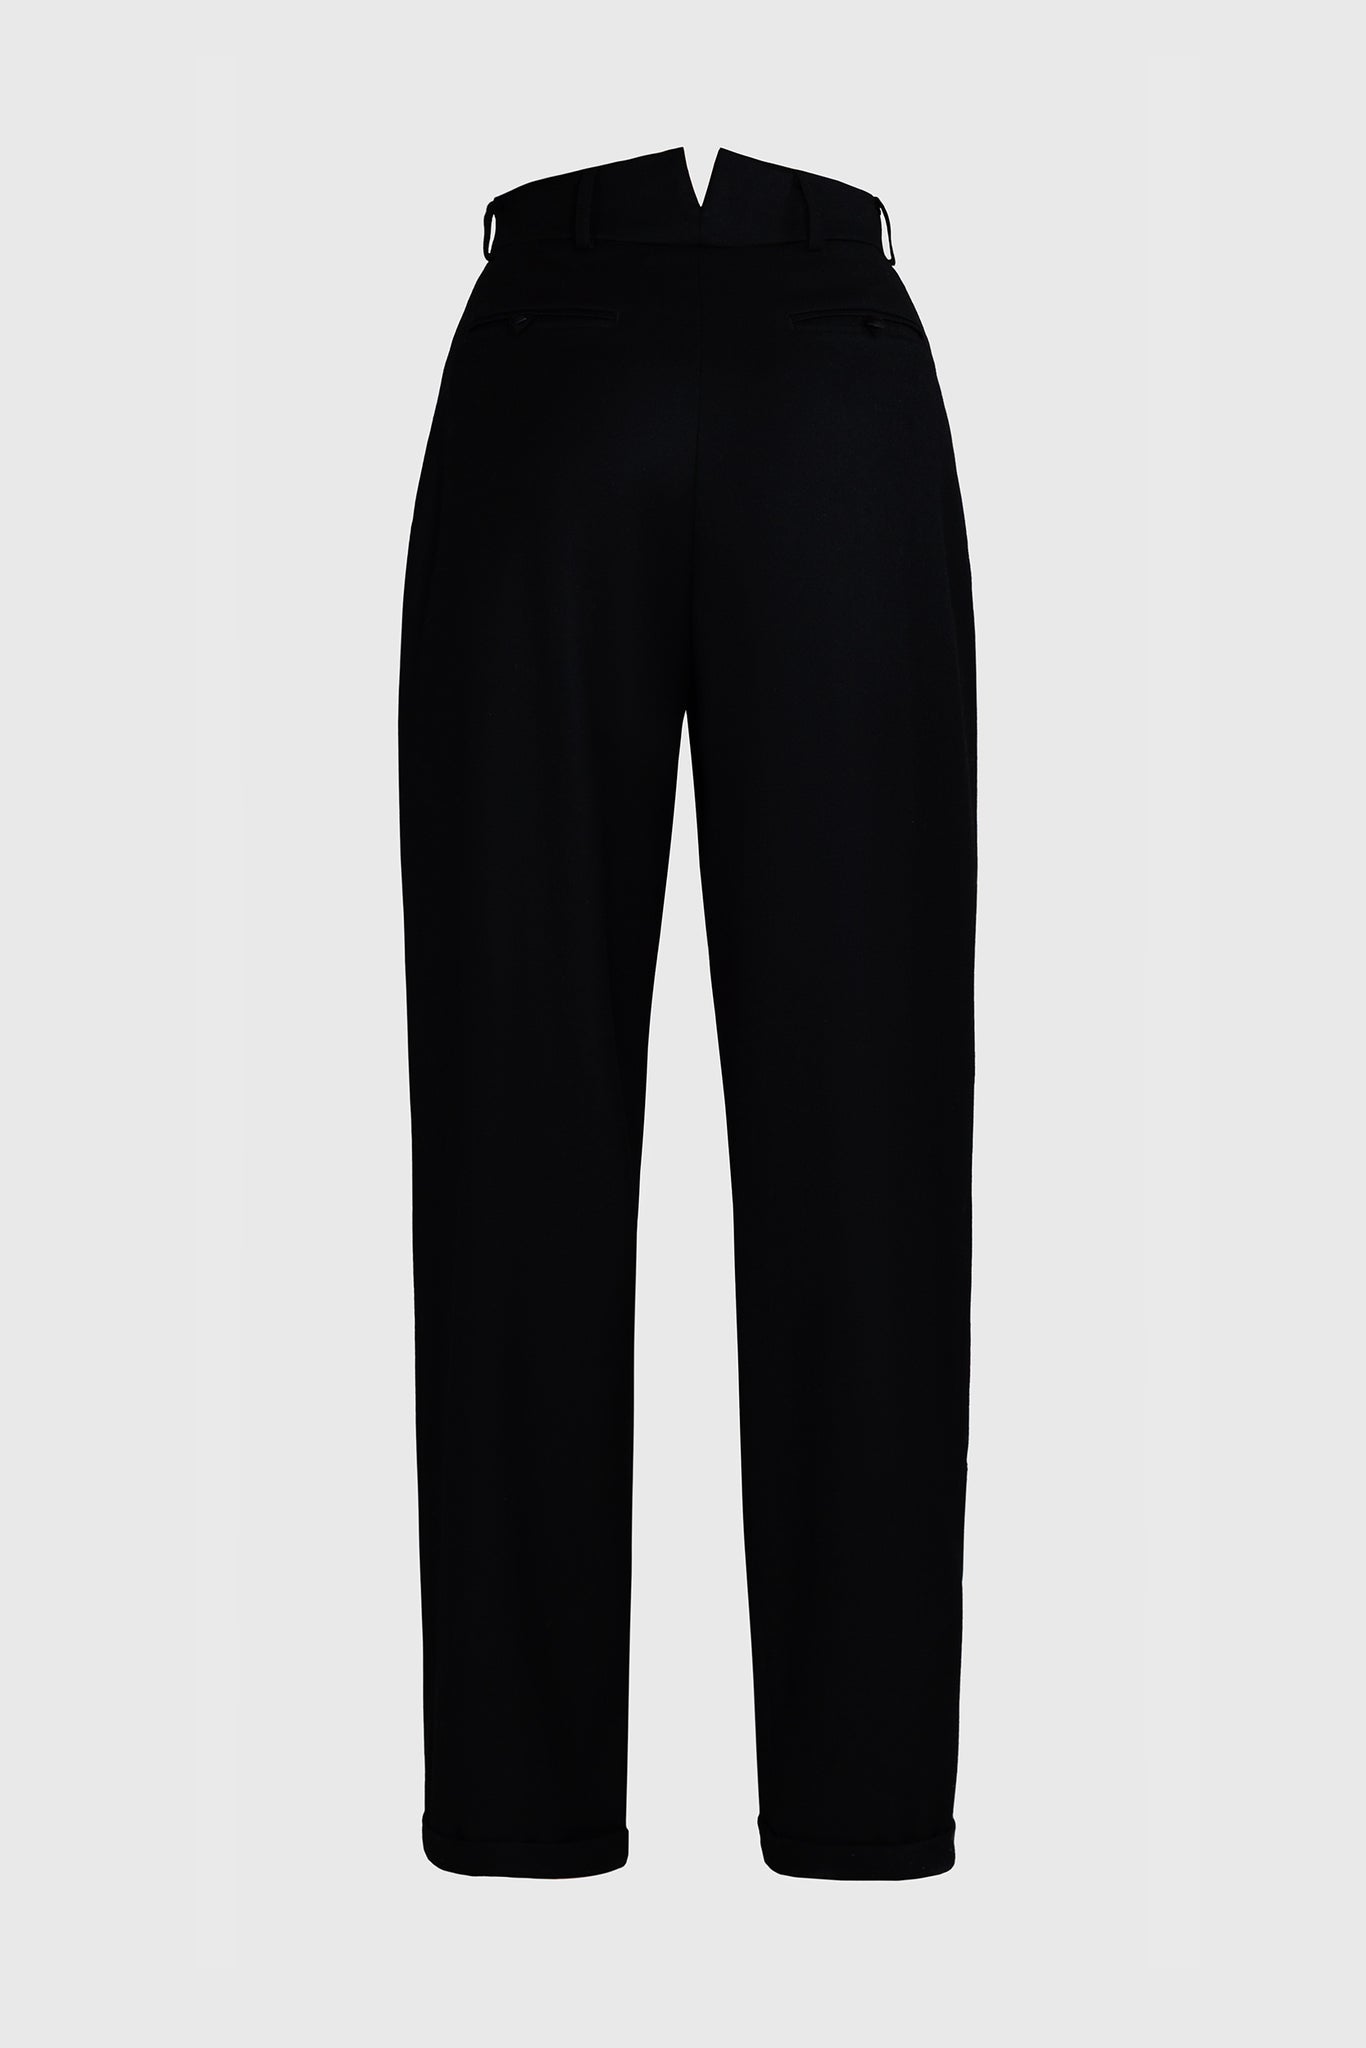 Ruxandra luxury fashion designer for women and men, wool straight trousers, vintage style back, for an elegant silhouette, Kate Blanchet style suit trousers, with a playful twist, split waistband, showing off craftsmanship 